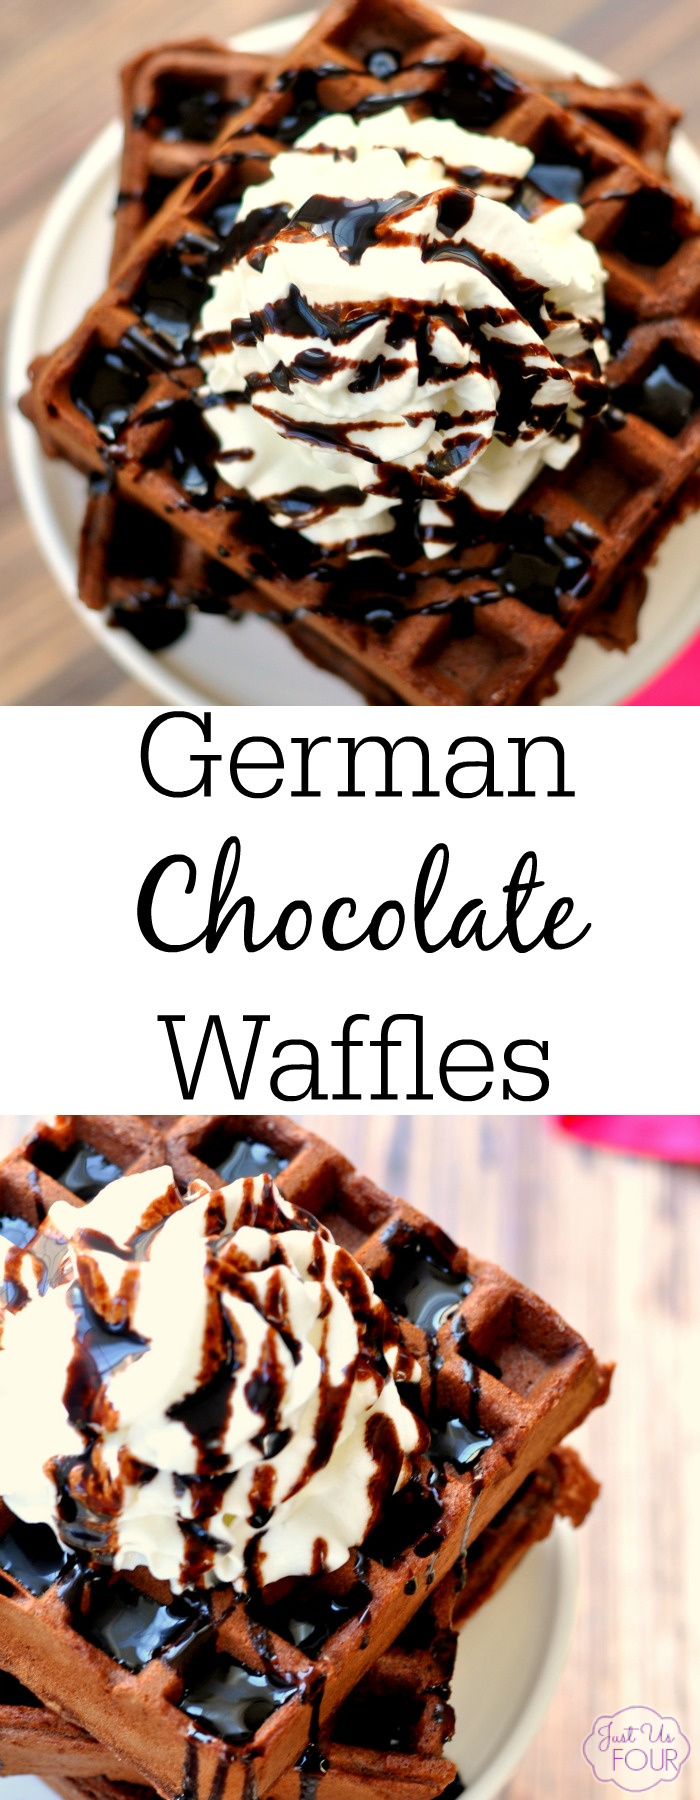 German chocolate waffles are the perfect sweet breakfast treat. Or, serve them for dessert.